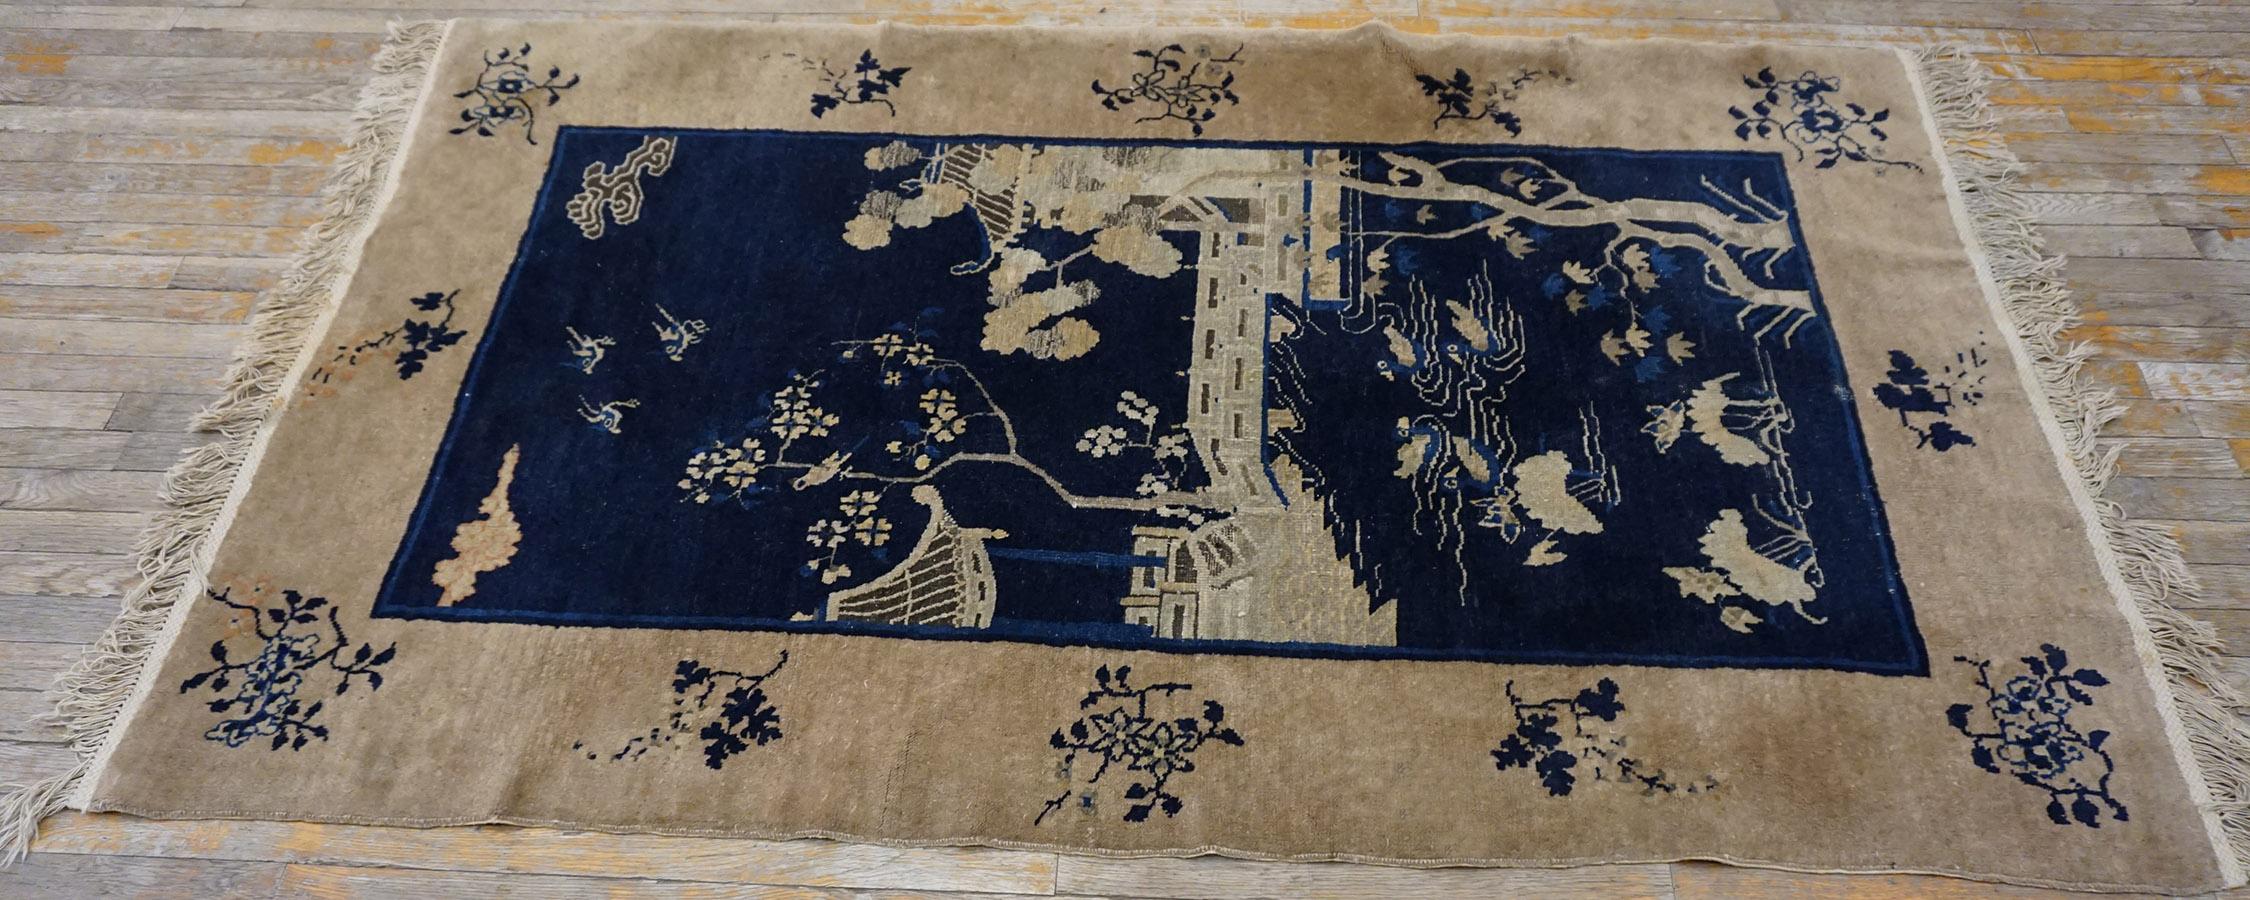 Early 20th Century Chinese Carpet ( 4' x 6'8